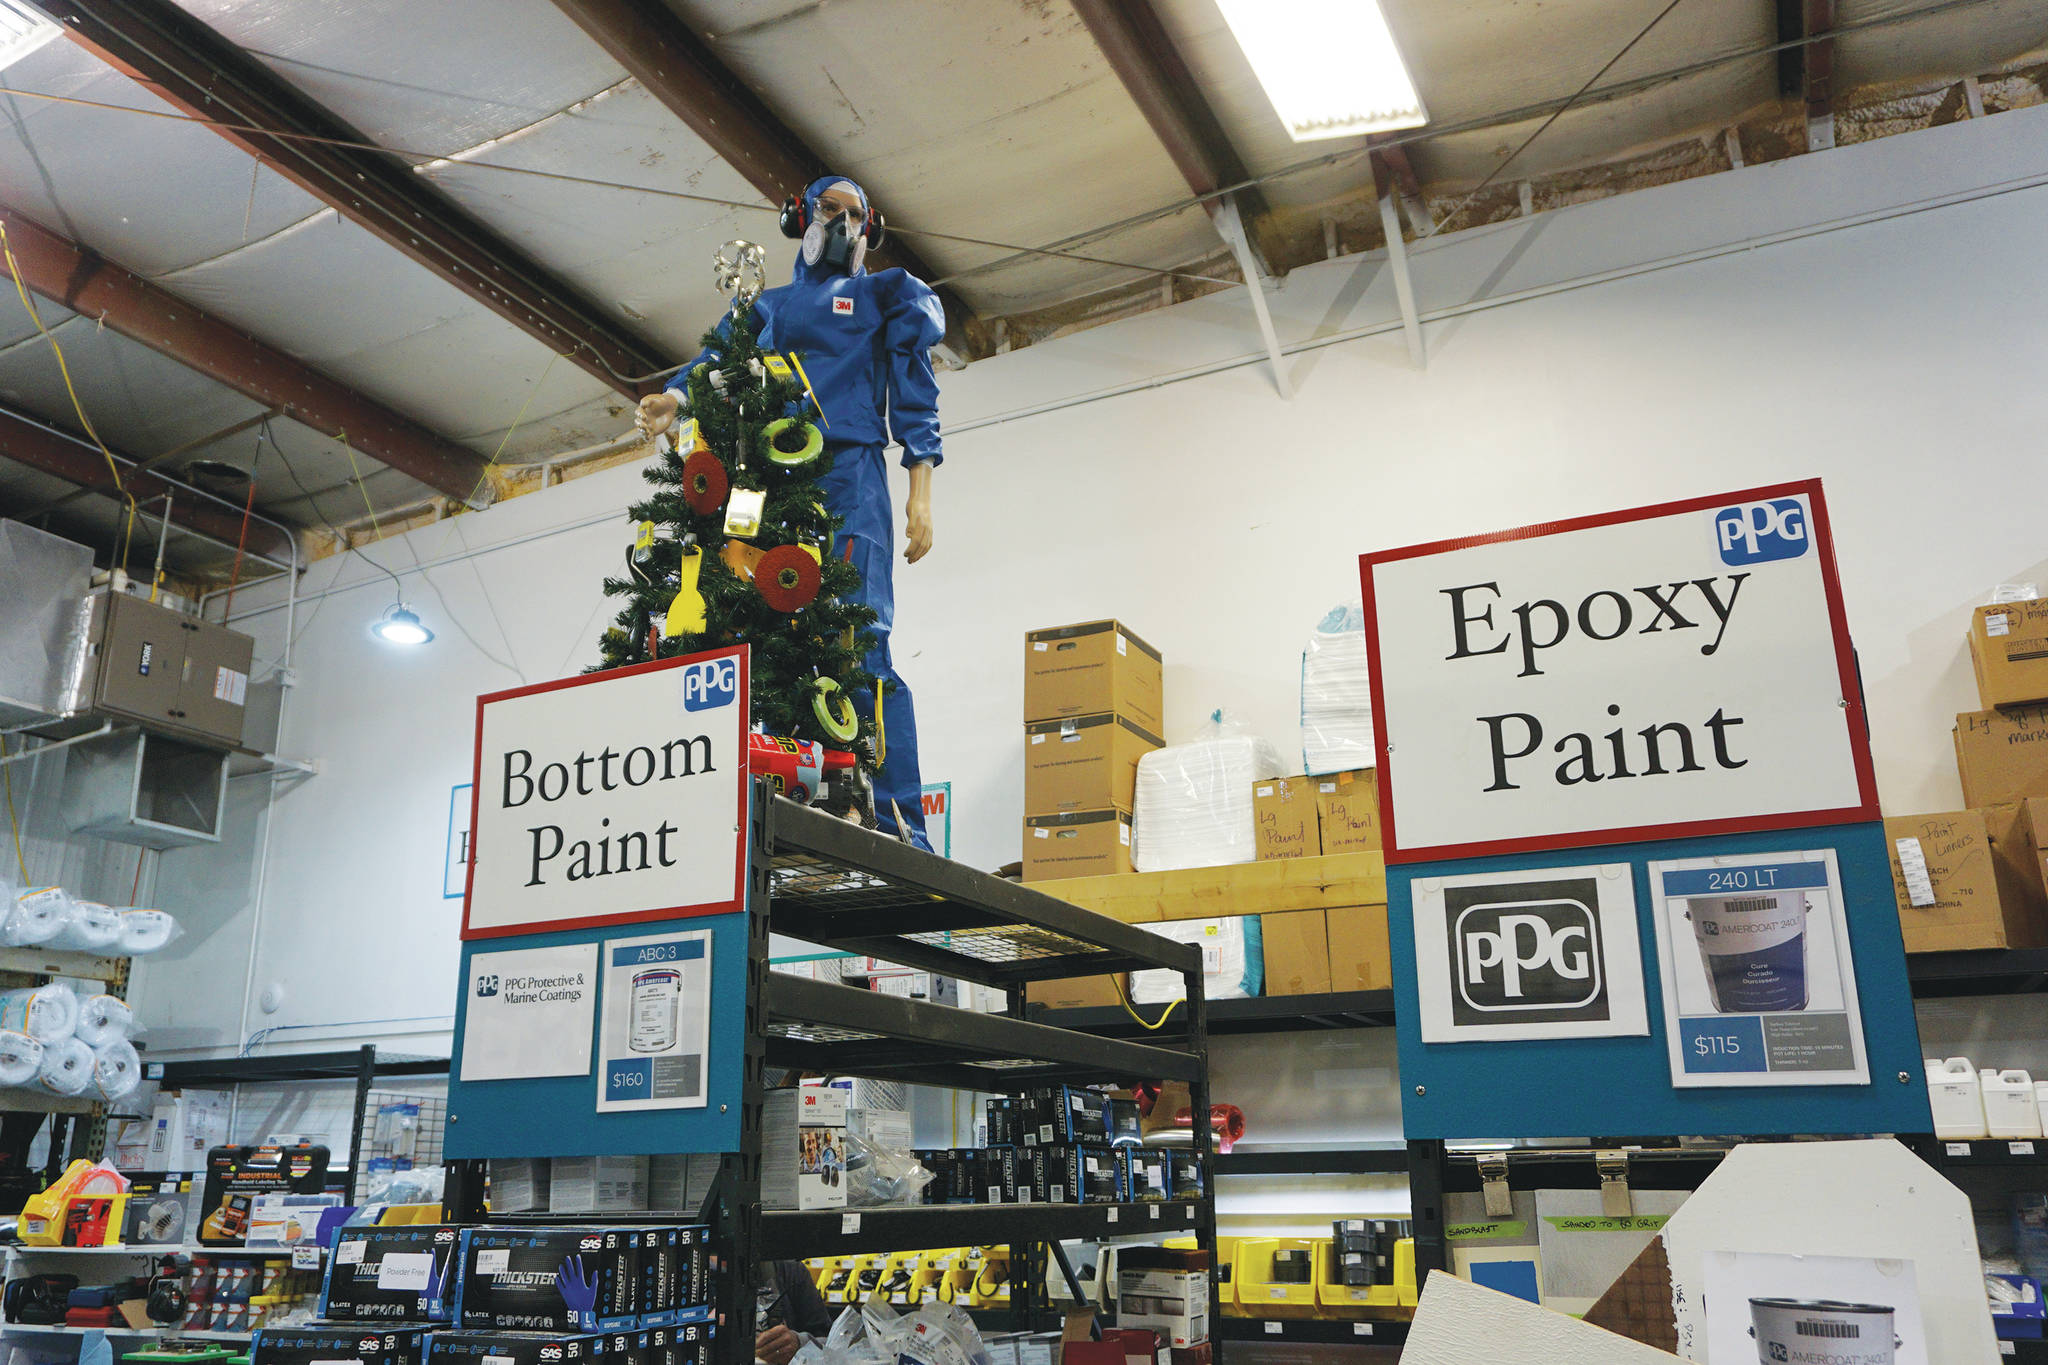 The display at Homer Marine includes Charlie, a mannequin wearing industrial safety gear like ear protectors and respirators, as seen here on Thursday, Dec. 17, 2020, at the store in the Northern Enterprises Boatyard in Homer, Alaska. (Photo by Michael Armstrong/Homer News)